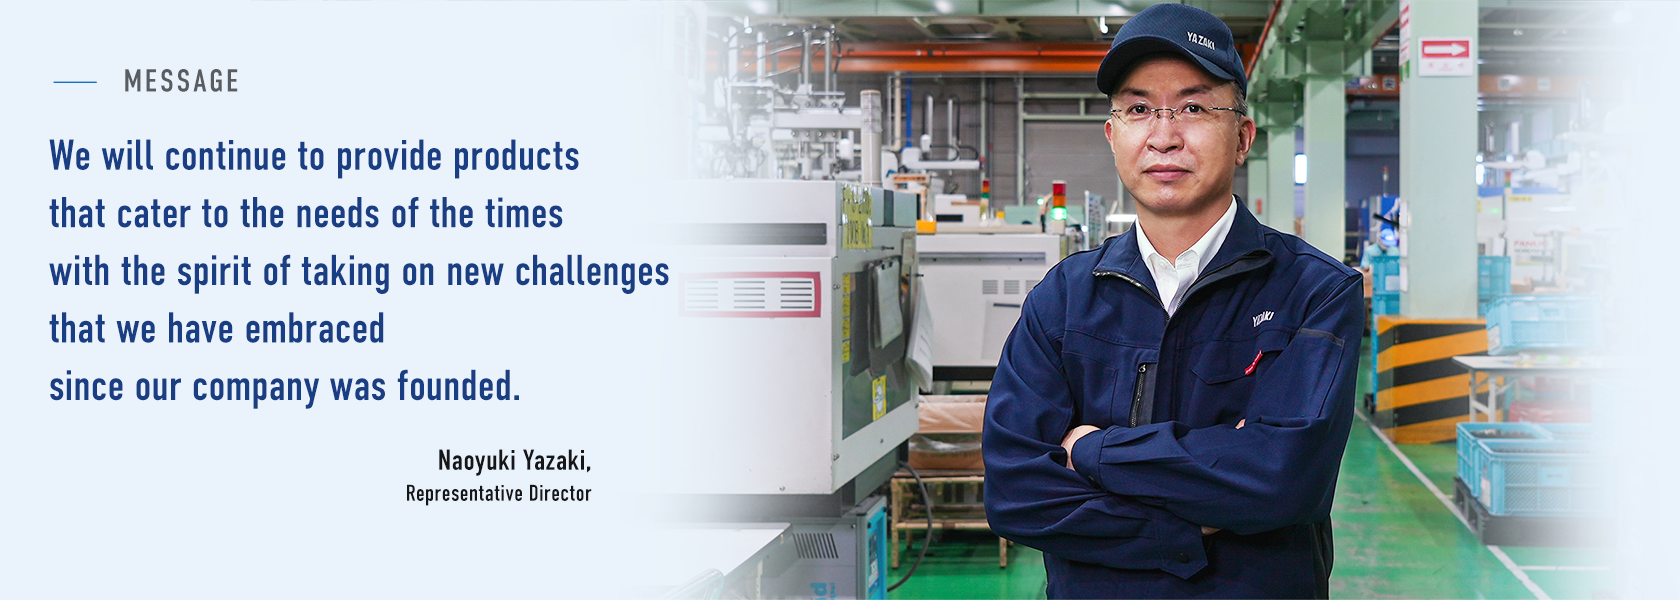 We will continue to provide products that cater to the needs of the times
with the spirit of taking on new challenges that we have embraced since our company was founded. Naoyuki Yazaki, Representative Director